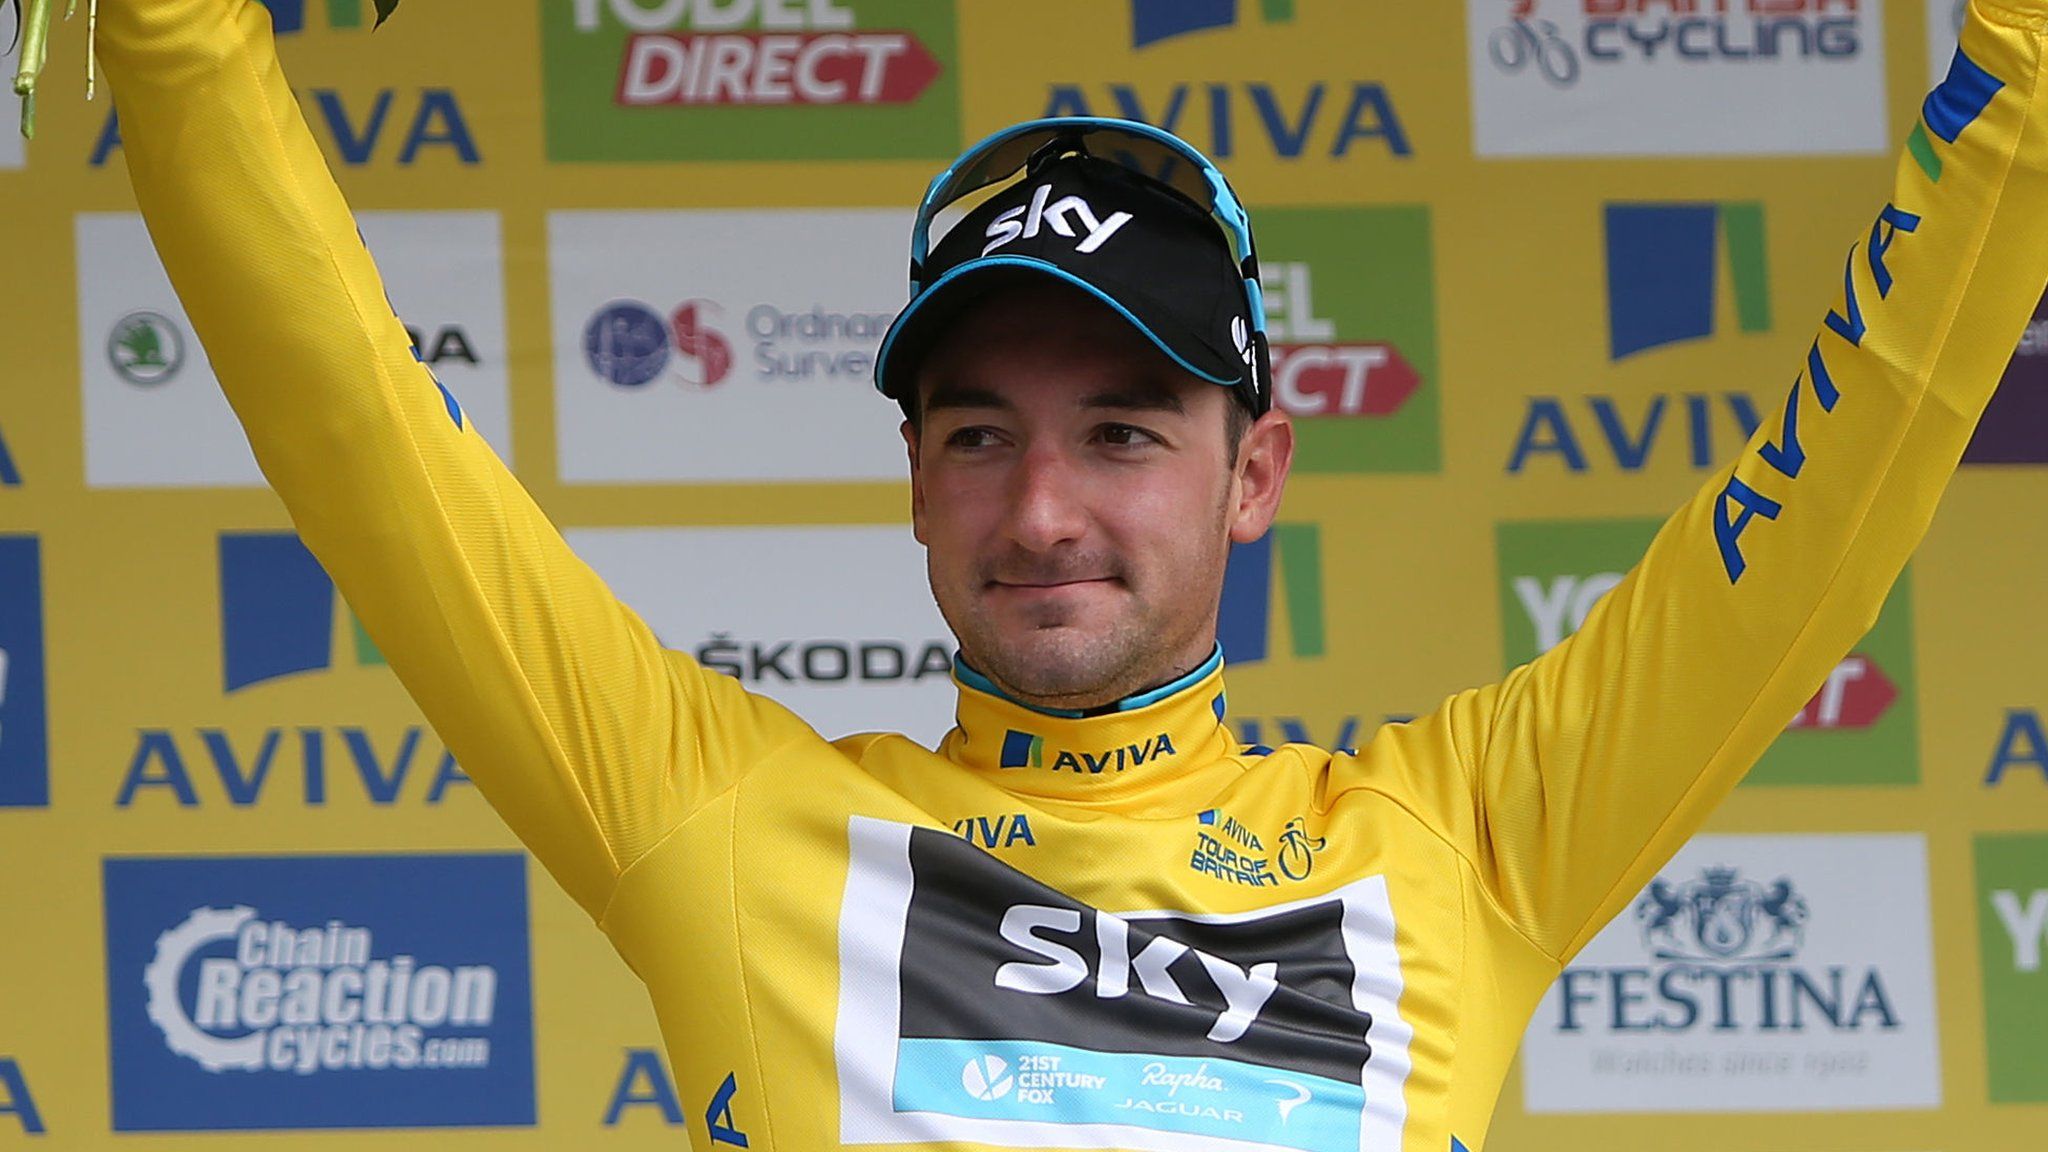 Tour of Britain 2015: Results and standings - BBC Sport